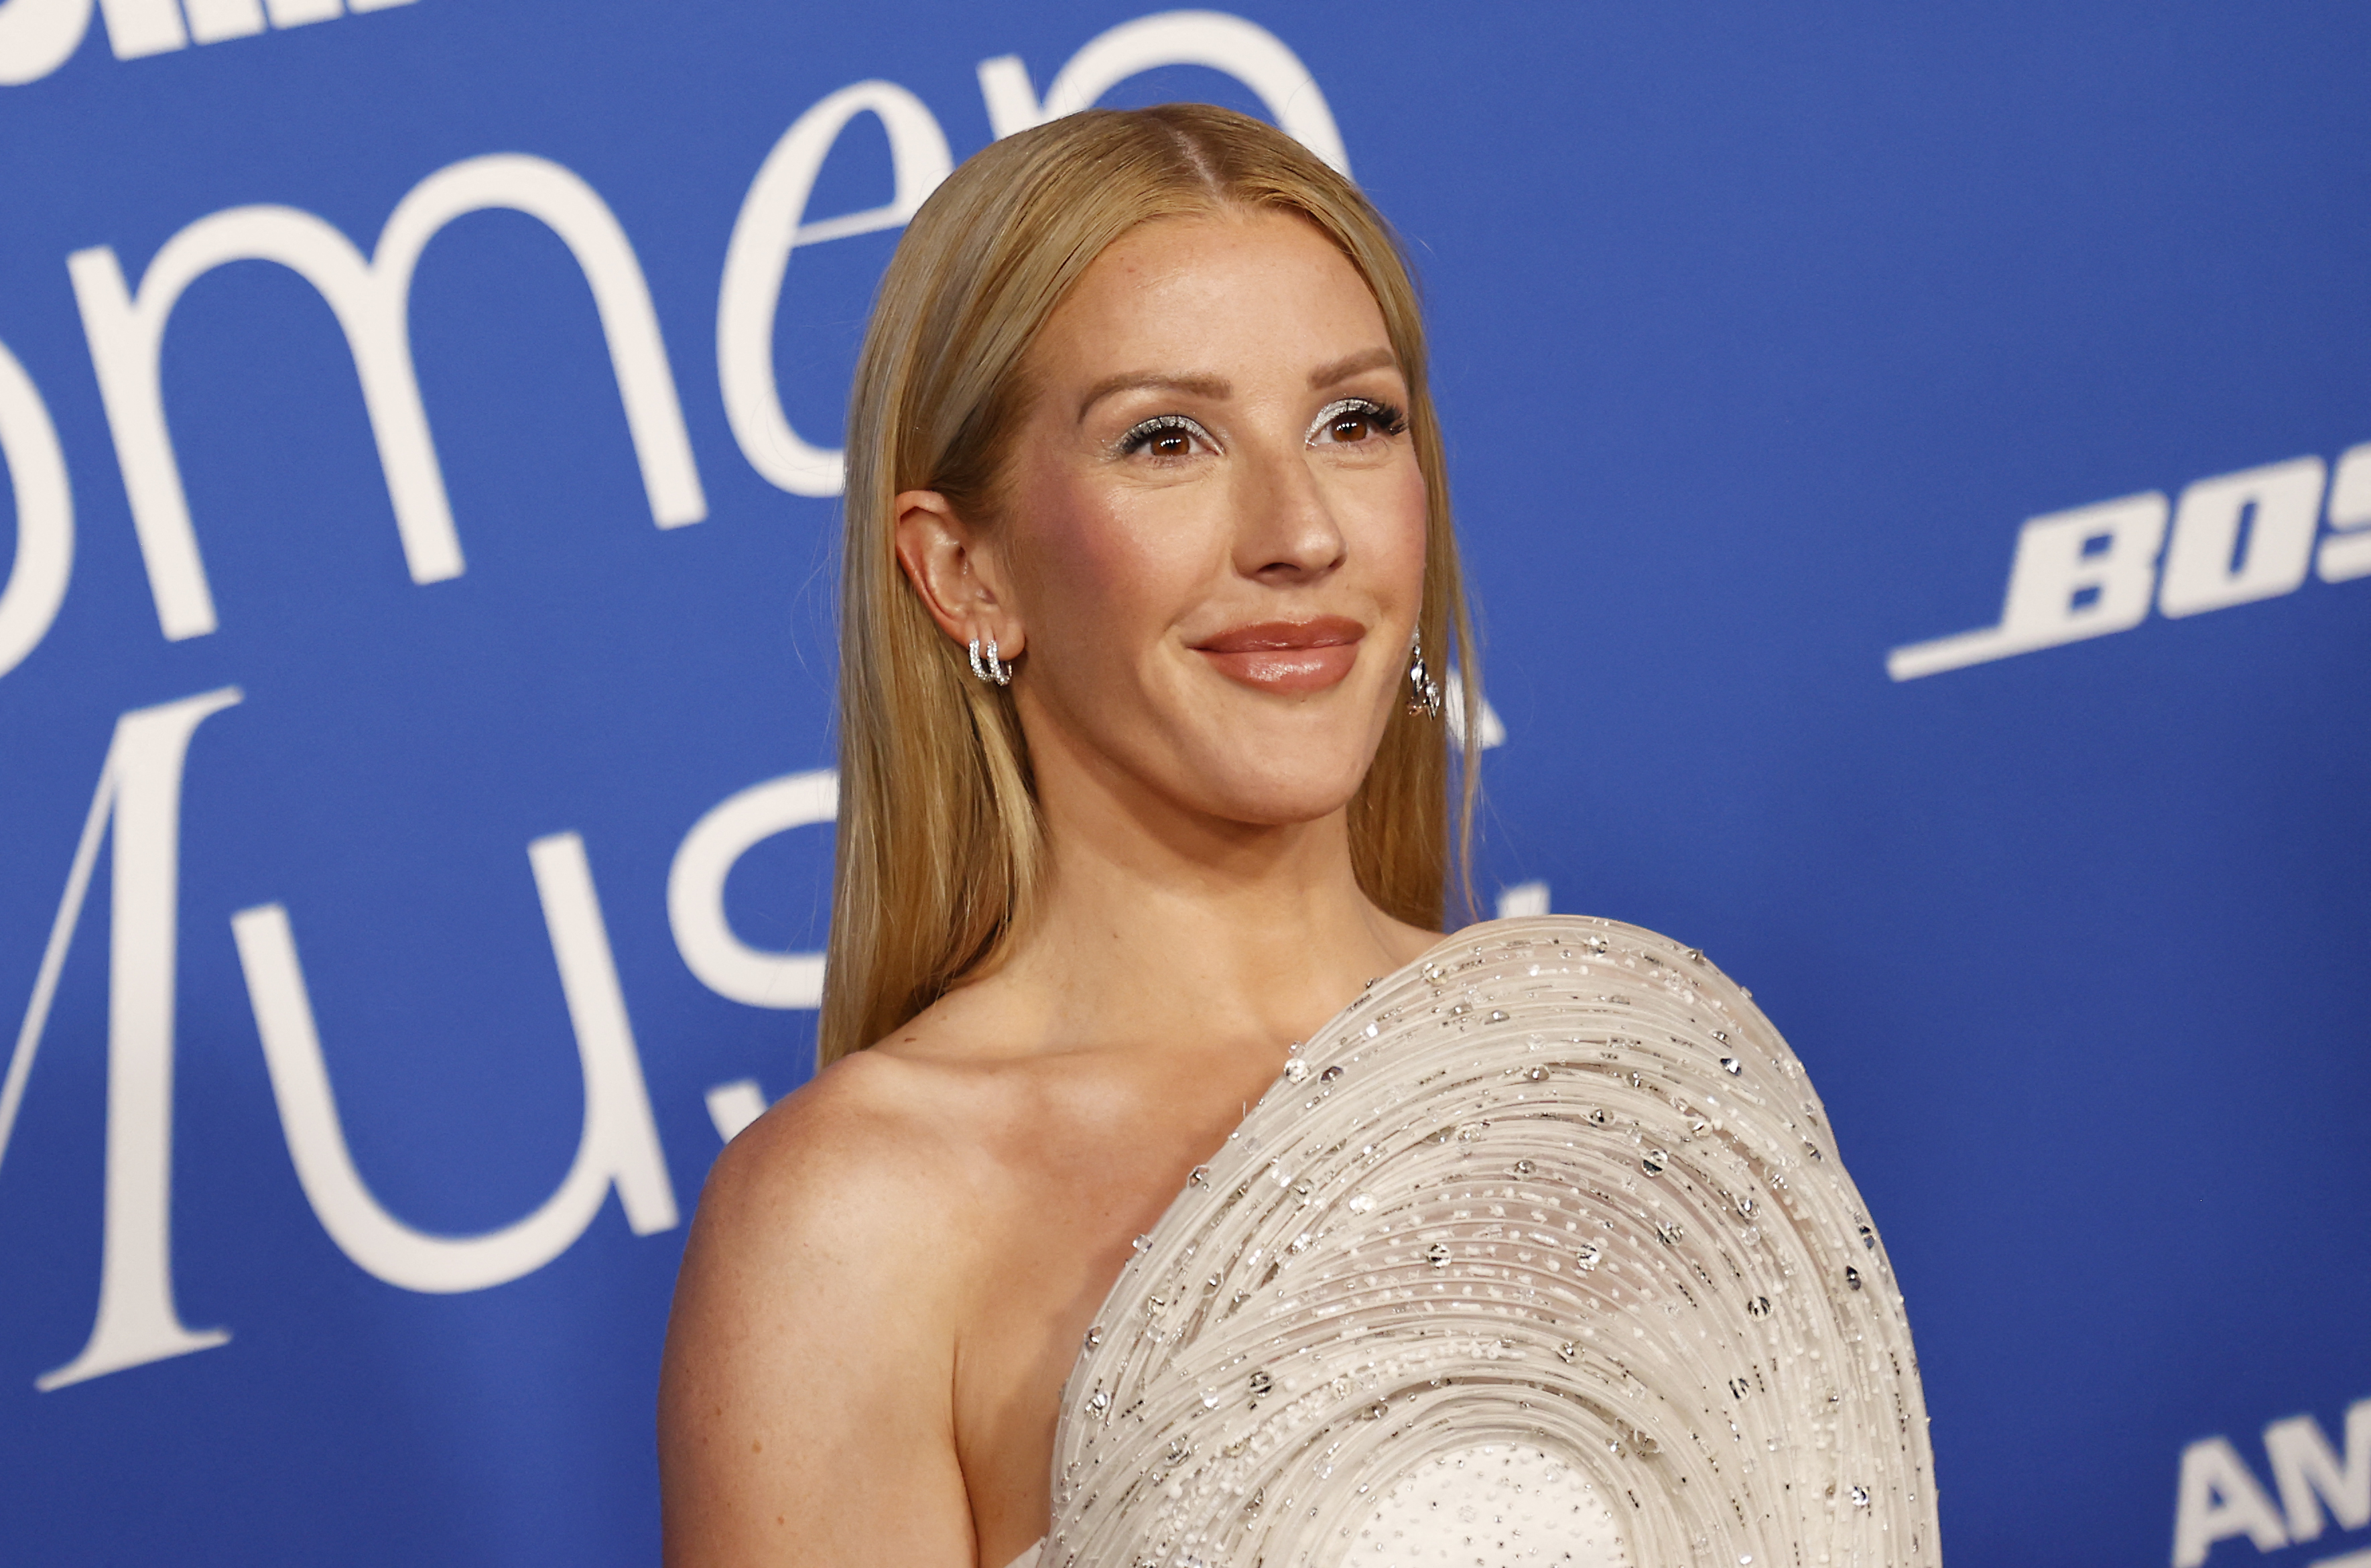 Ellie Goulding smiling, wearing a beaded round-neck gown at a formal event with a logo backdrop